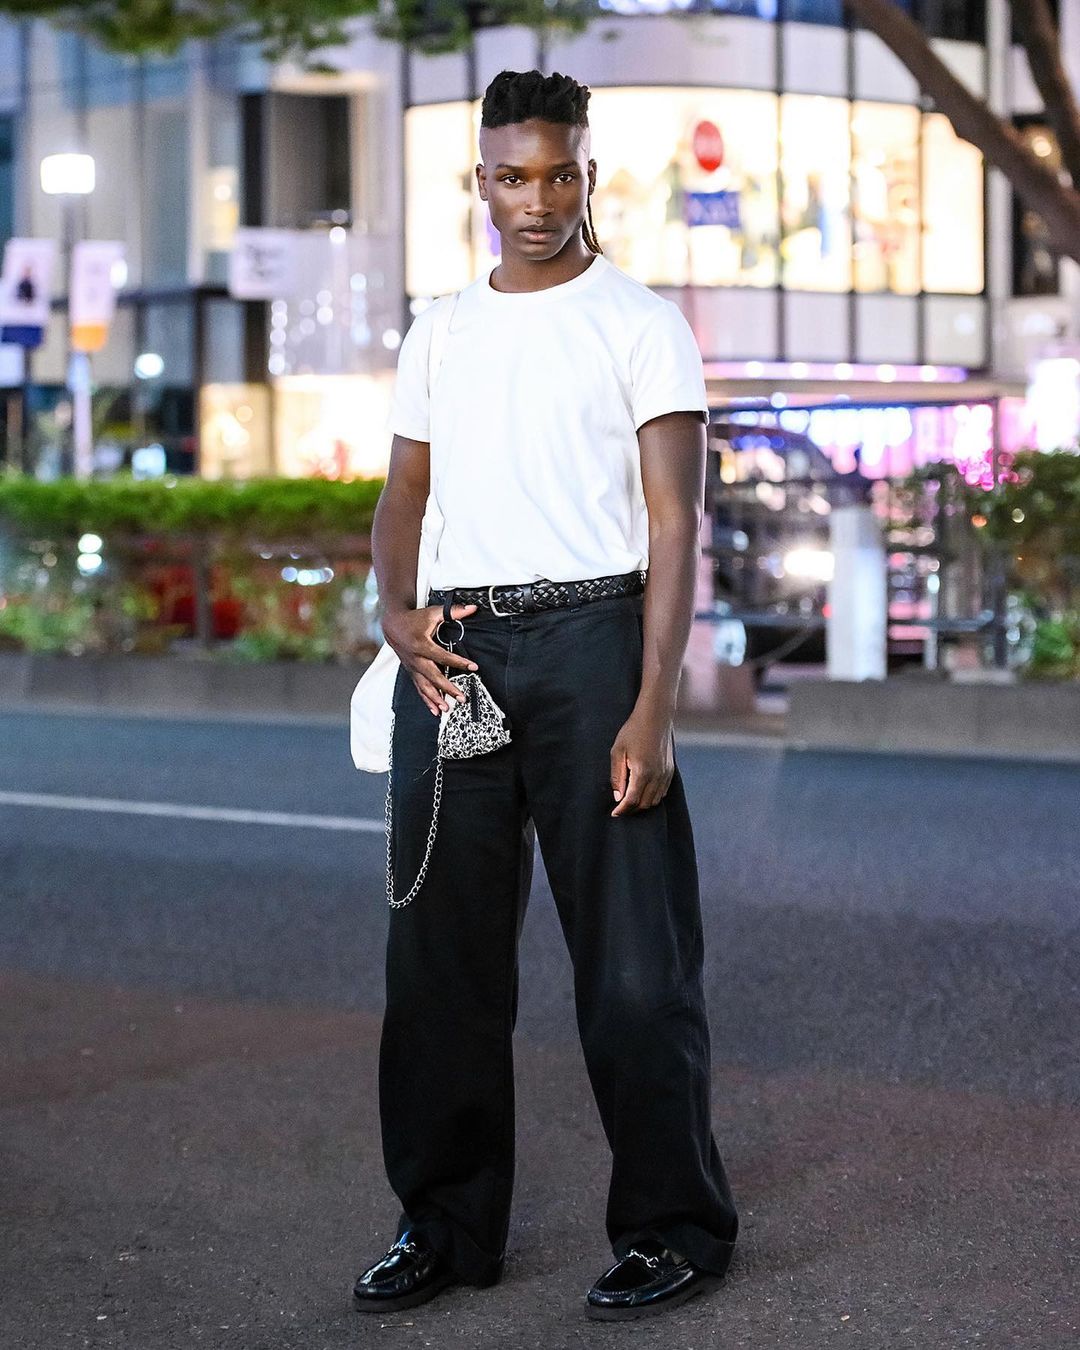 Tokyo Fashion: Fashion model Joseph Oxley (@things.shop.jo see comments ...